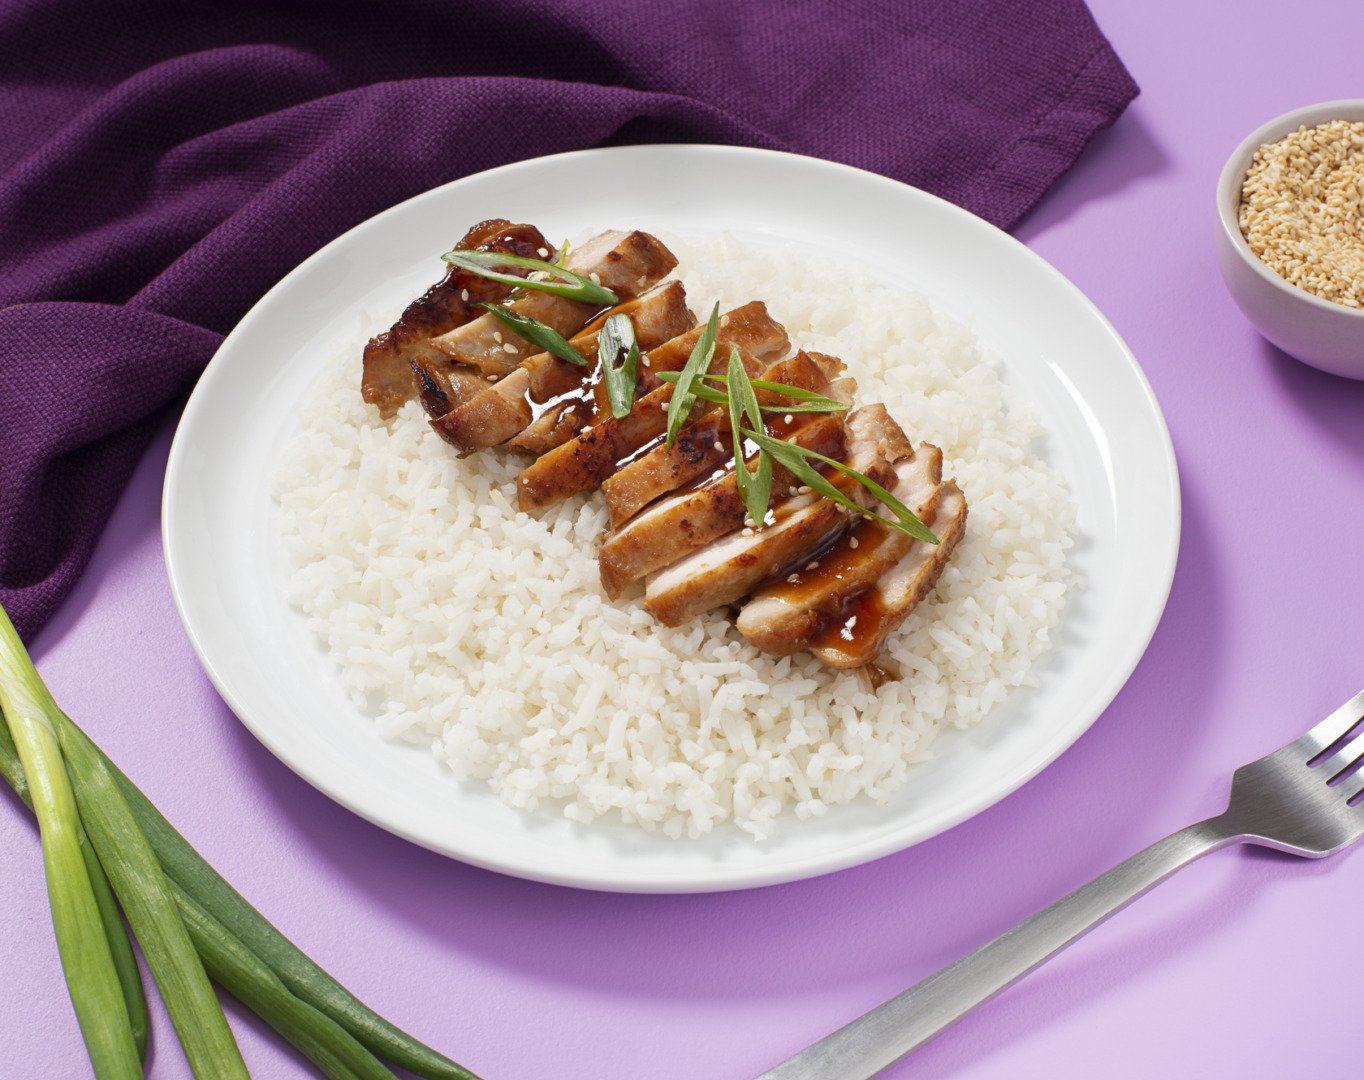 Supreme Rice, Check out this delicious Ginger Soy Glazen Chicken over  Herbed Jasmine Rice. Chef Belton's Big Easy Meal with Supreme Rice! Make  Every Healthy Meal, By Great Day Louisiana